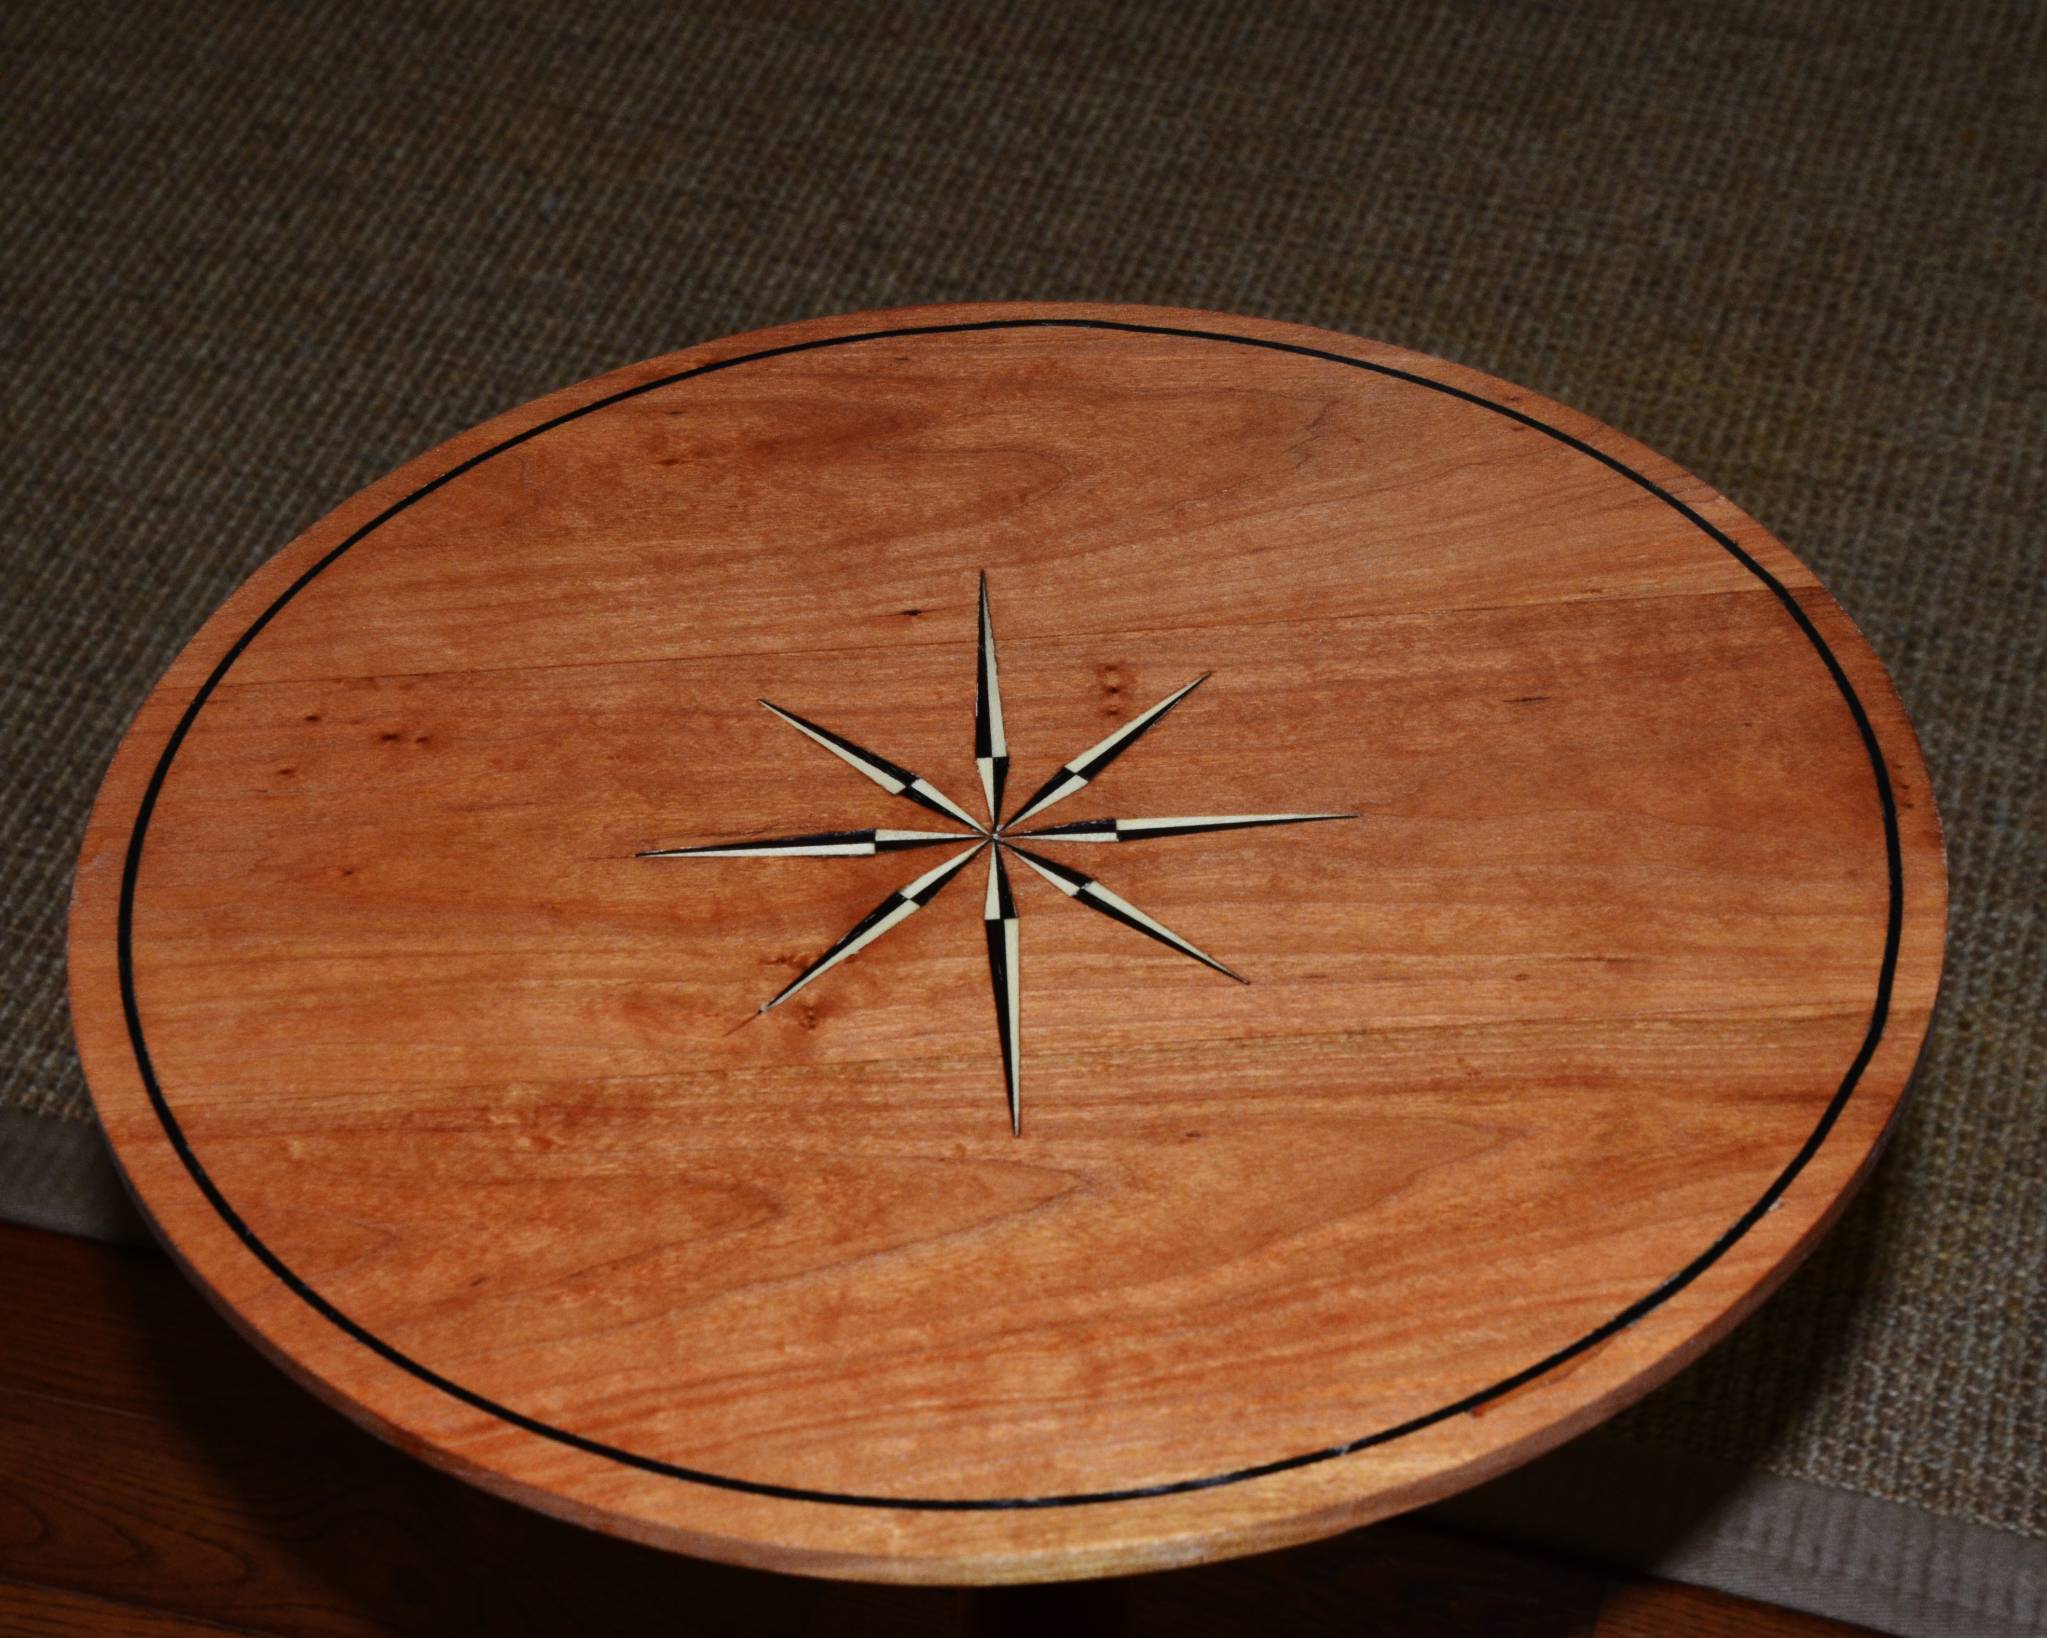 Cherry inlayed table